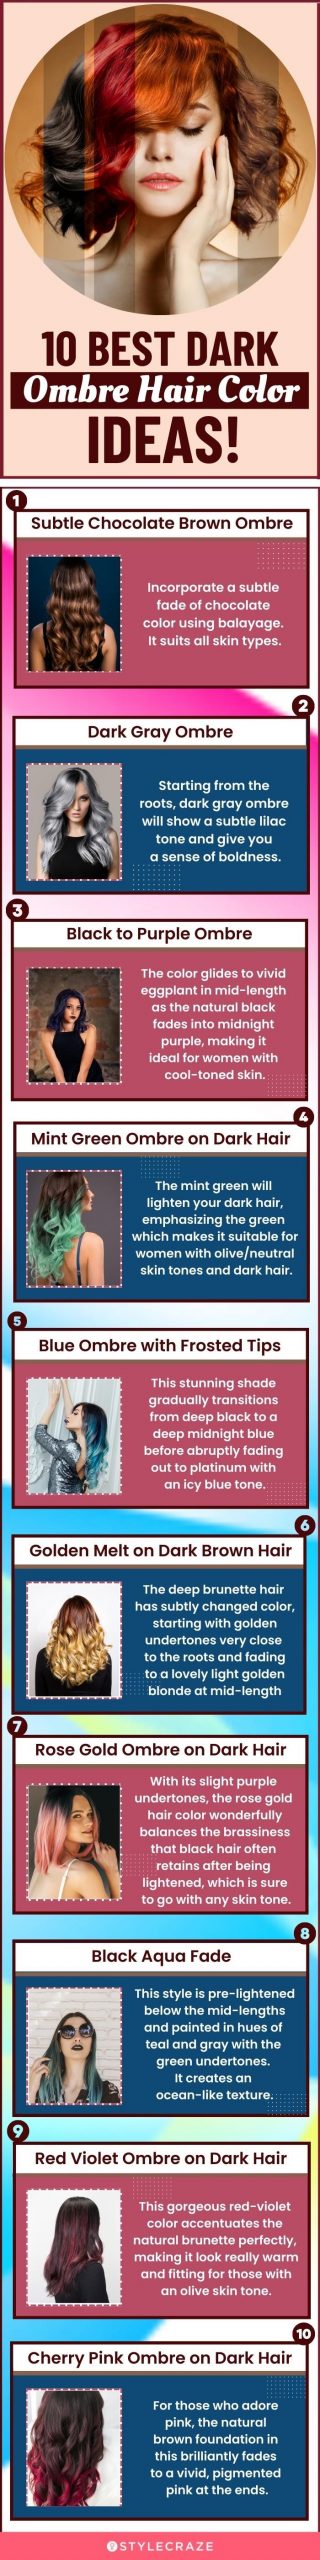 10 best dark ombre hair color ideas (infographic)